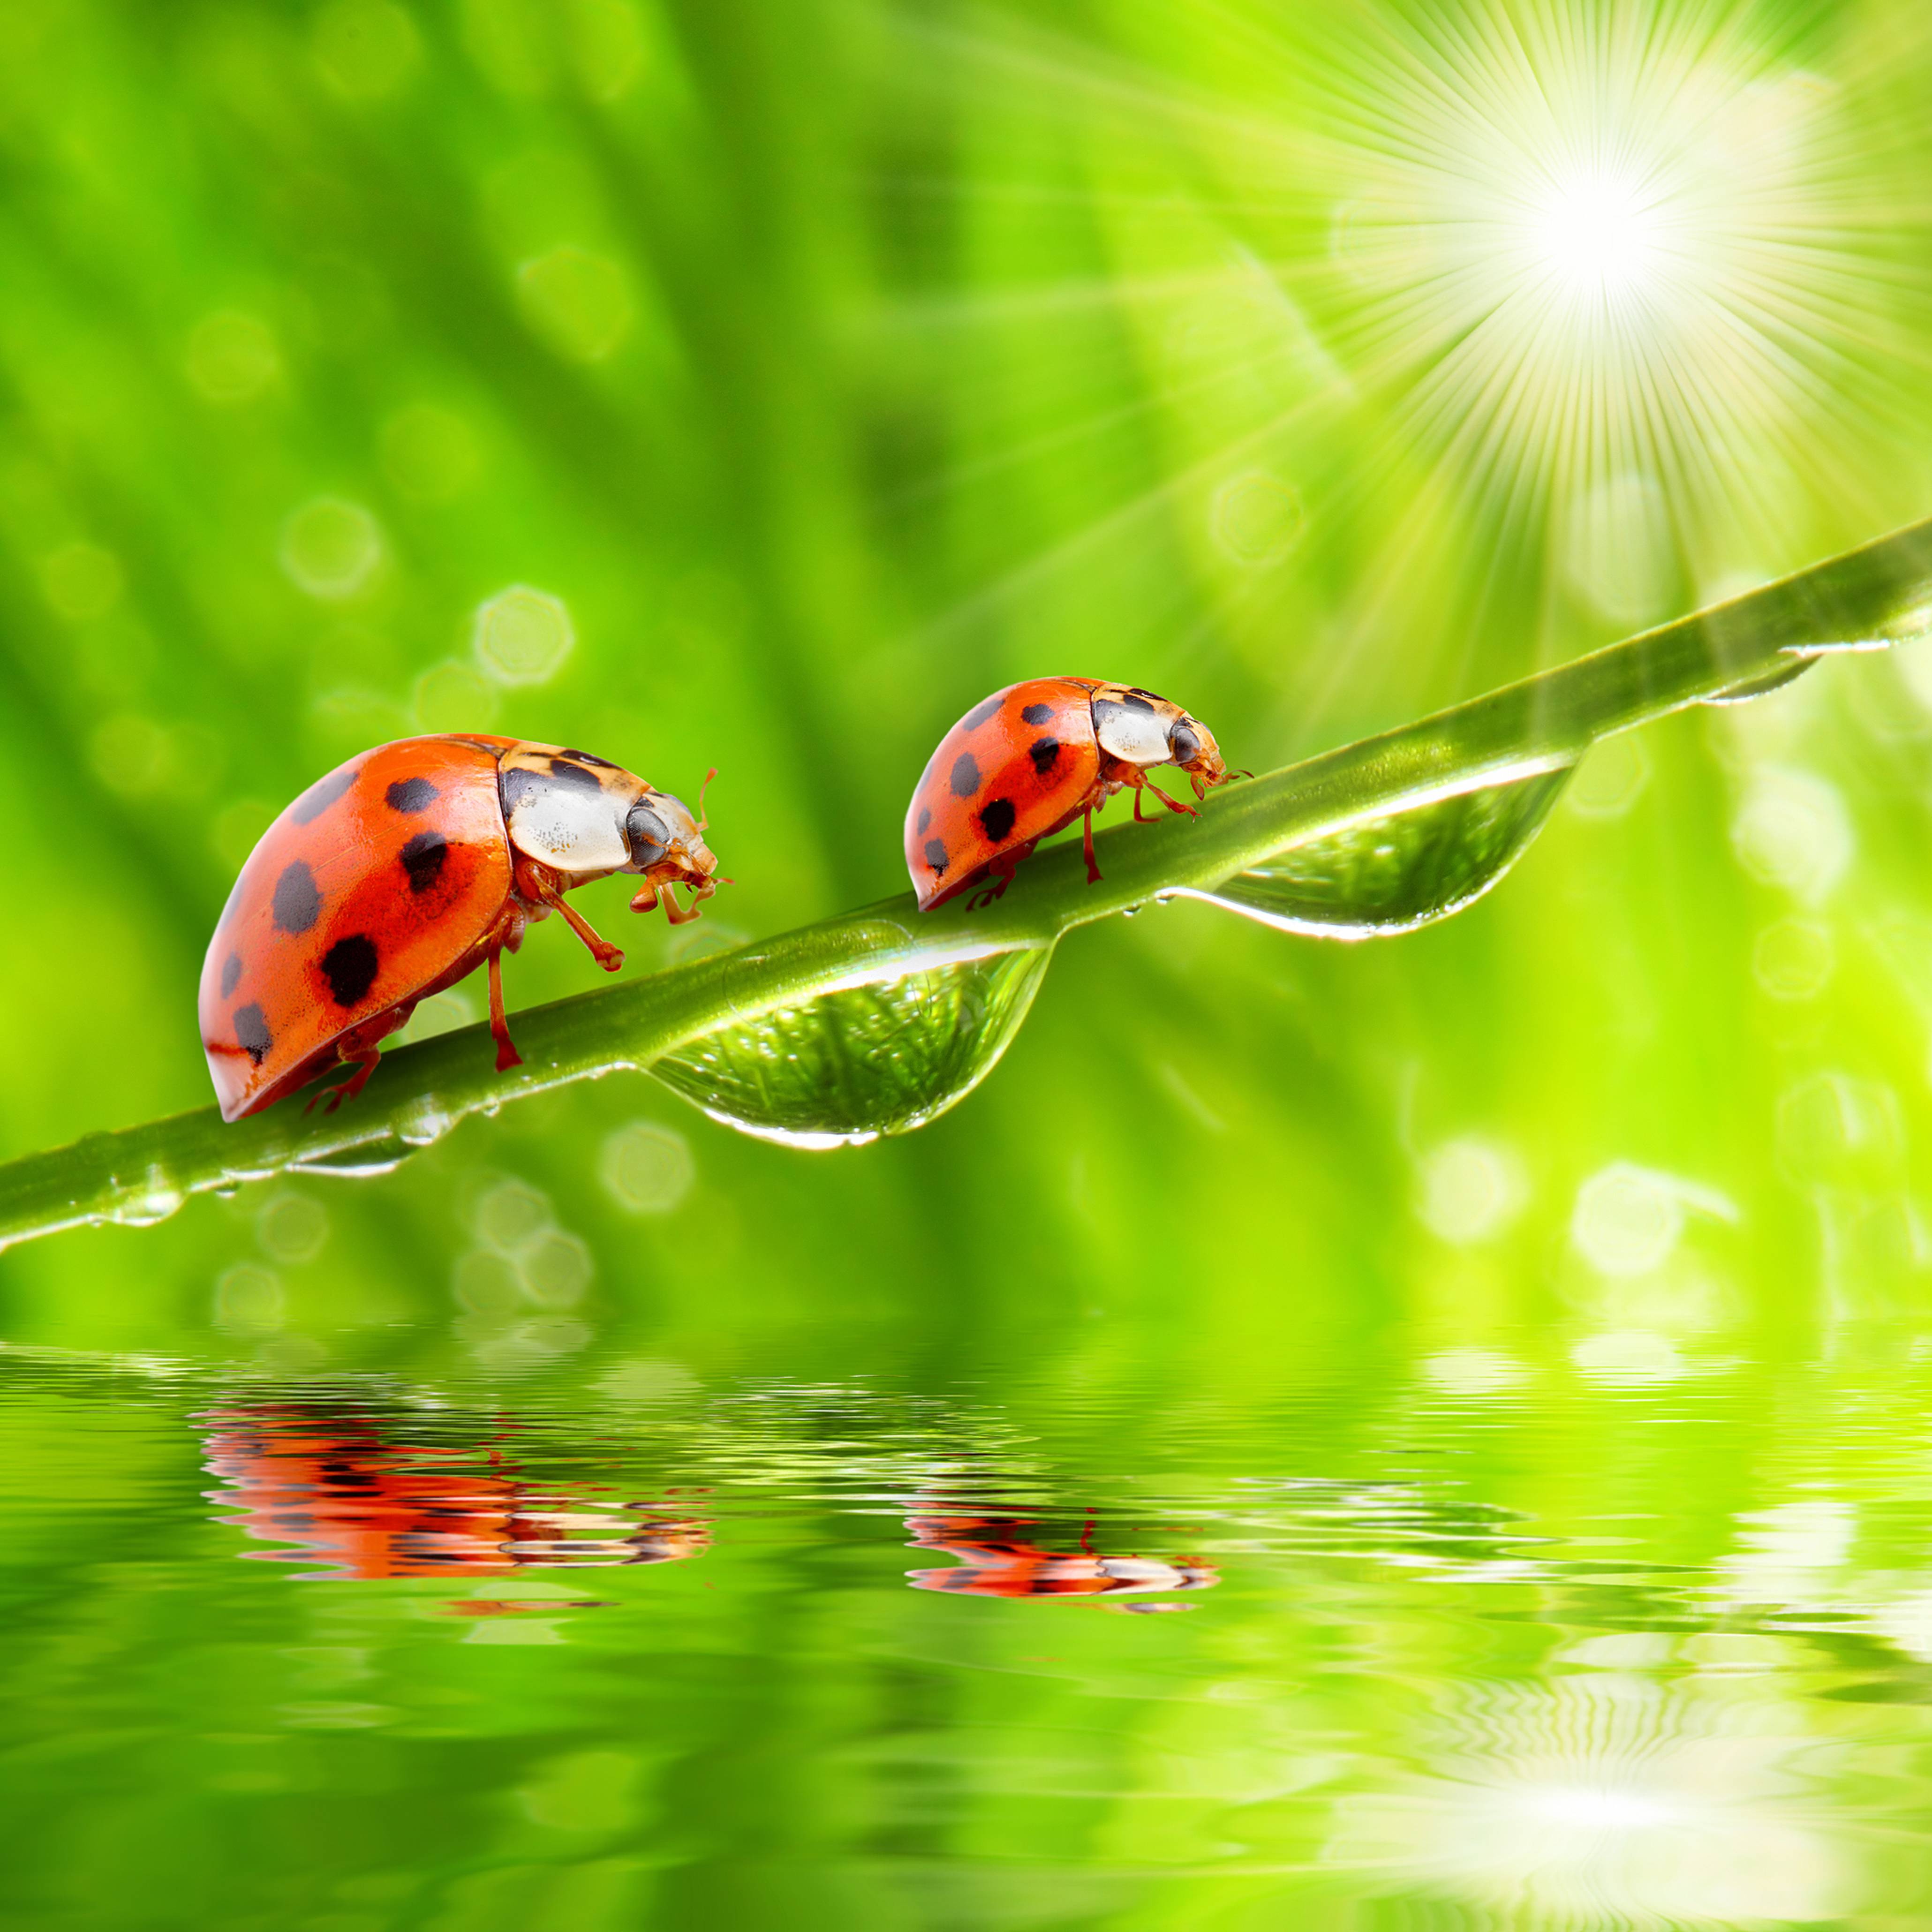 Wallpapers insects beetle greens on the desktop